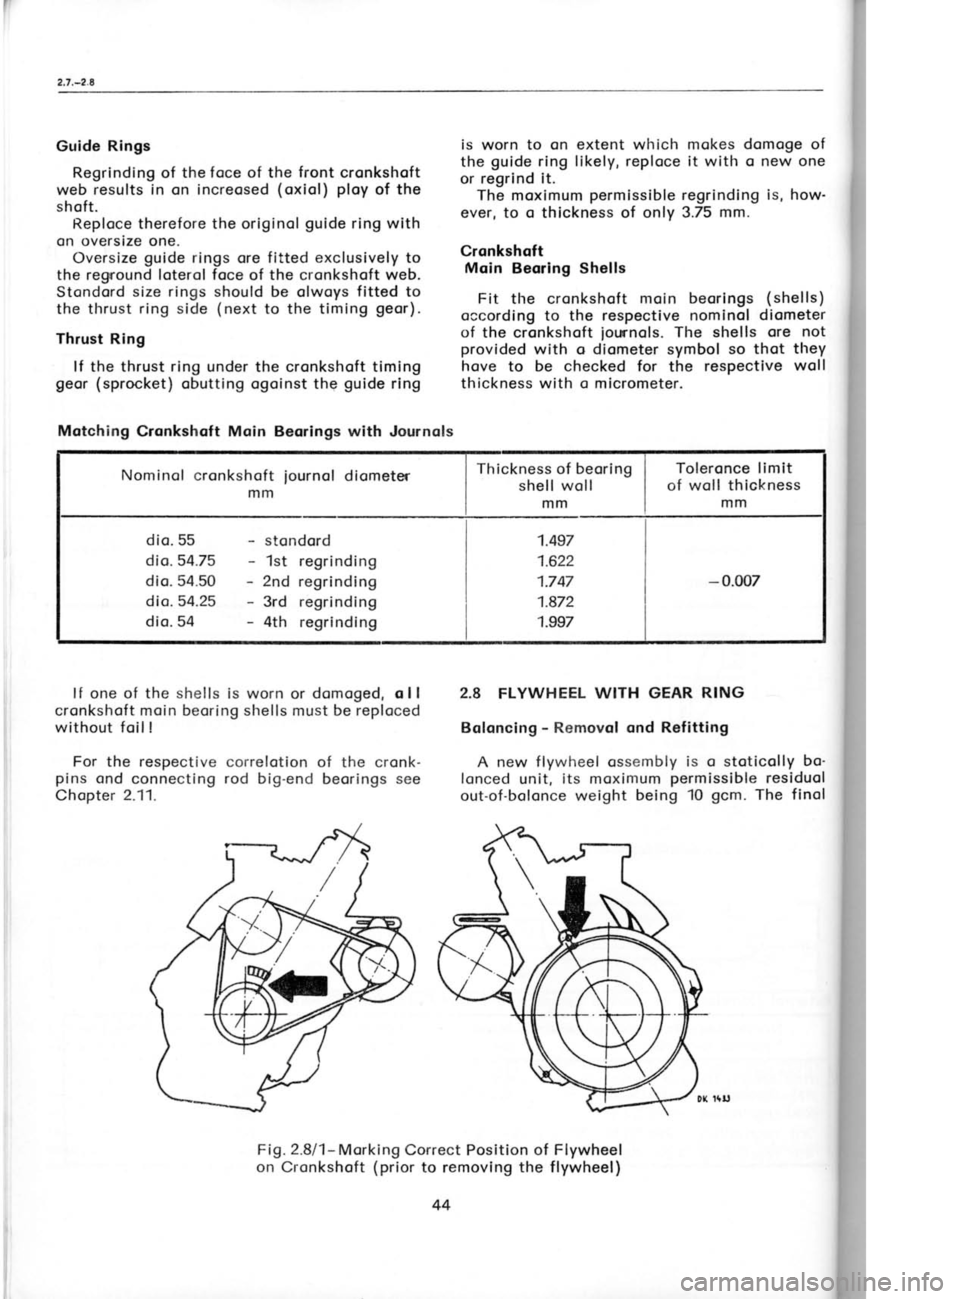 SKODA 120 LS 1980  Workshop Manual 2.7.-2.8
Guide Rings Regrinding of the foce of the  front 
cronkshoft
web results  in 
on increosed  (oxiol) ploy 
of the
shoft. Reploce therefore the originol  guide 
ring with
on oversize one. Overs